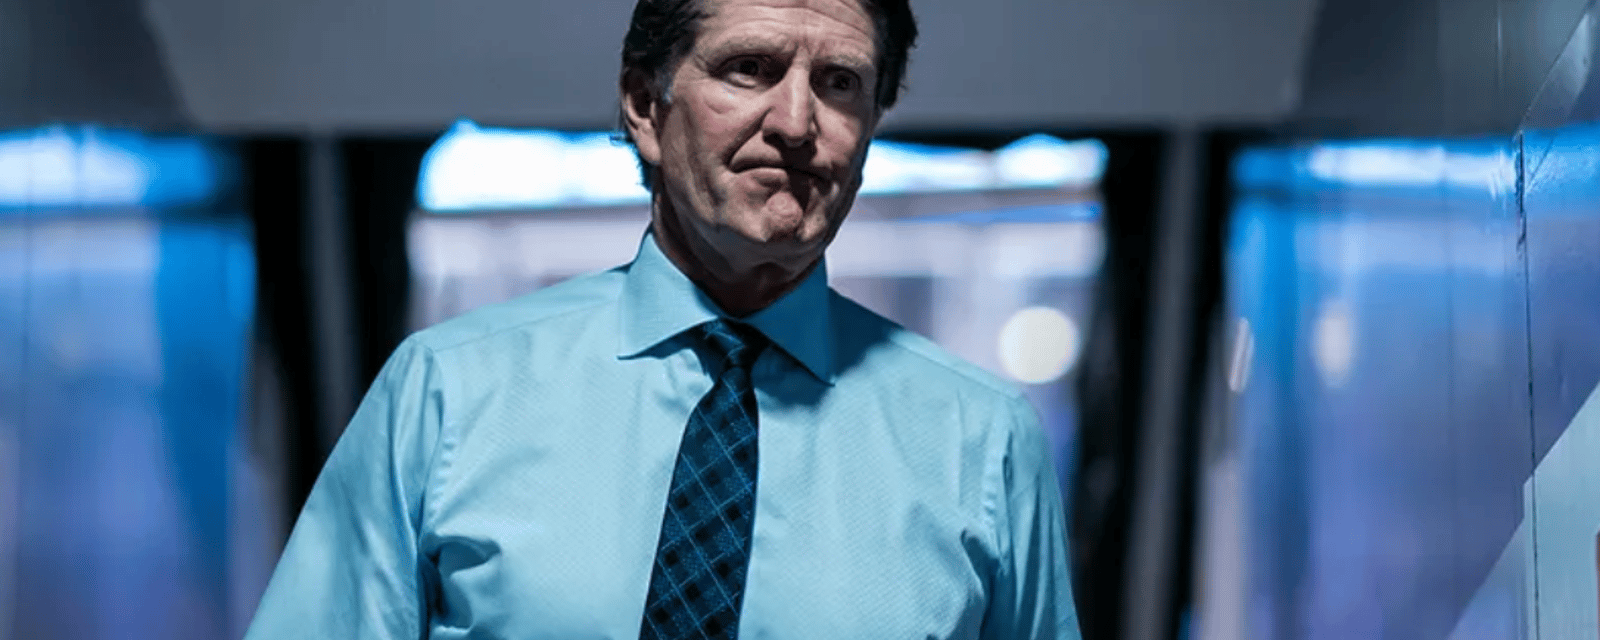 NHL Insider: Mike Babcock could be fired before even coaching a game! 